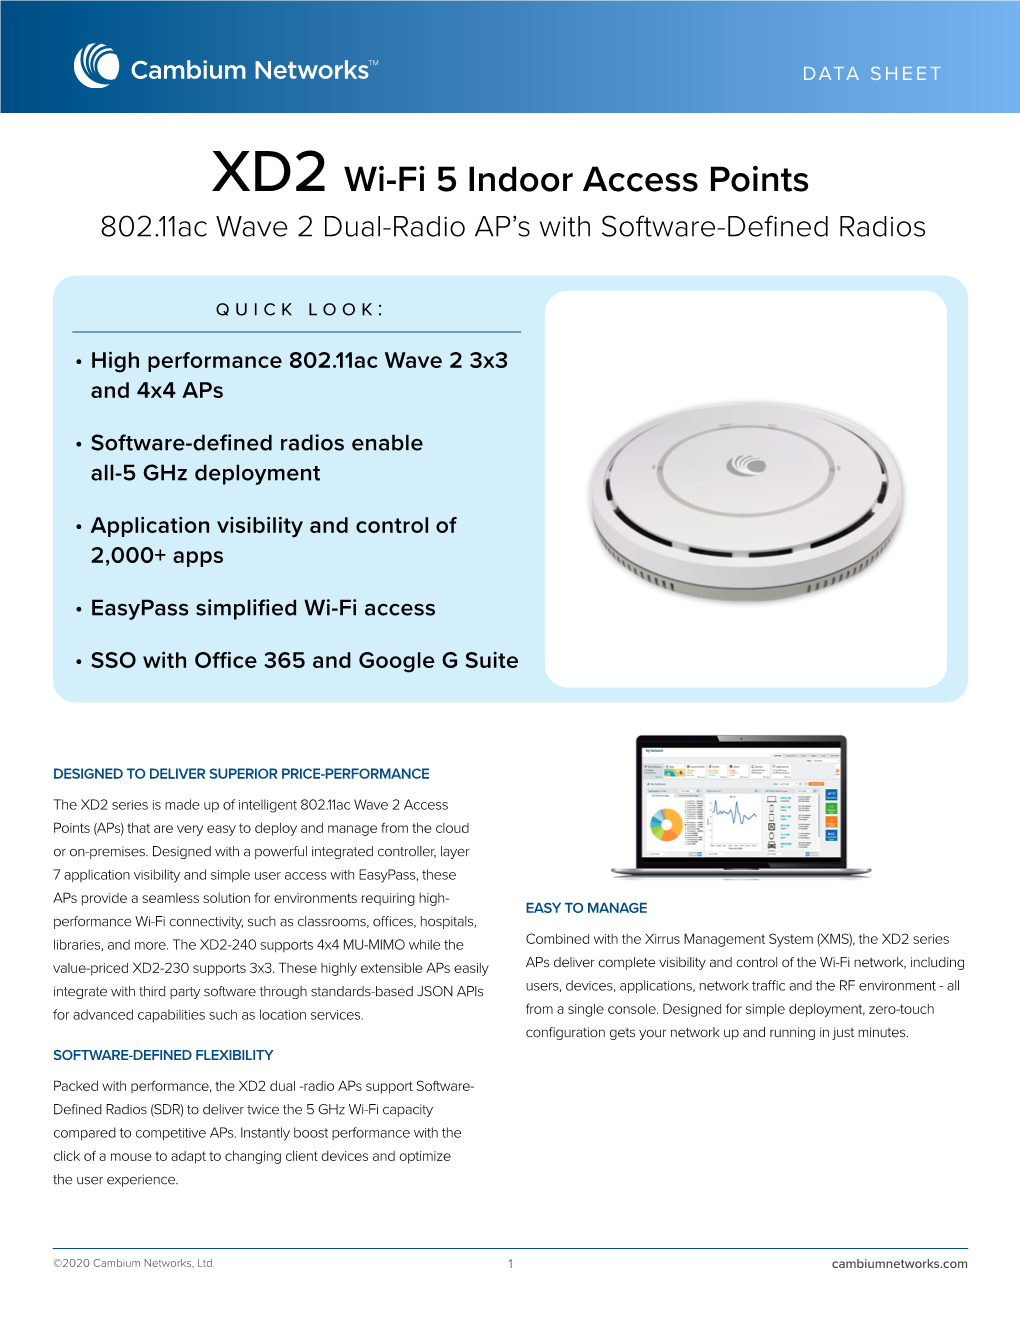 XD2 Wi-Fi 5 Indoor Access Points 802.11Ac Wave 2 Dual-Radio AP’S with Software-Defined Radios